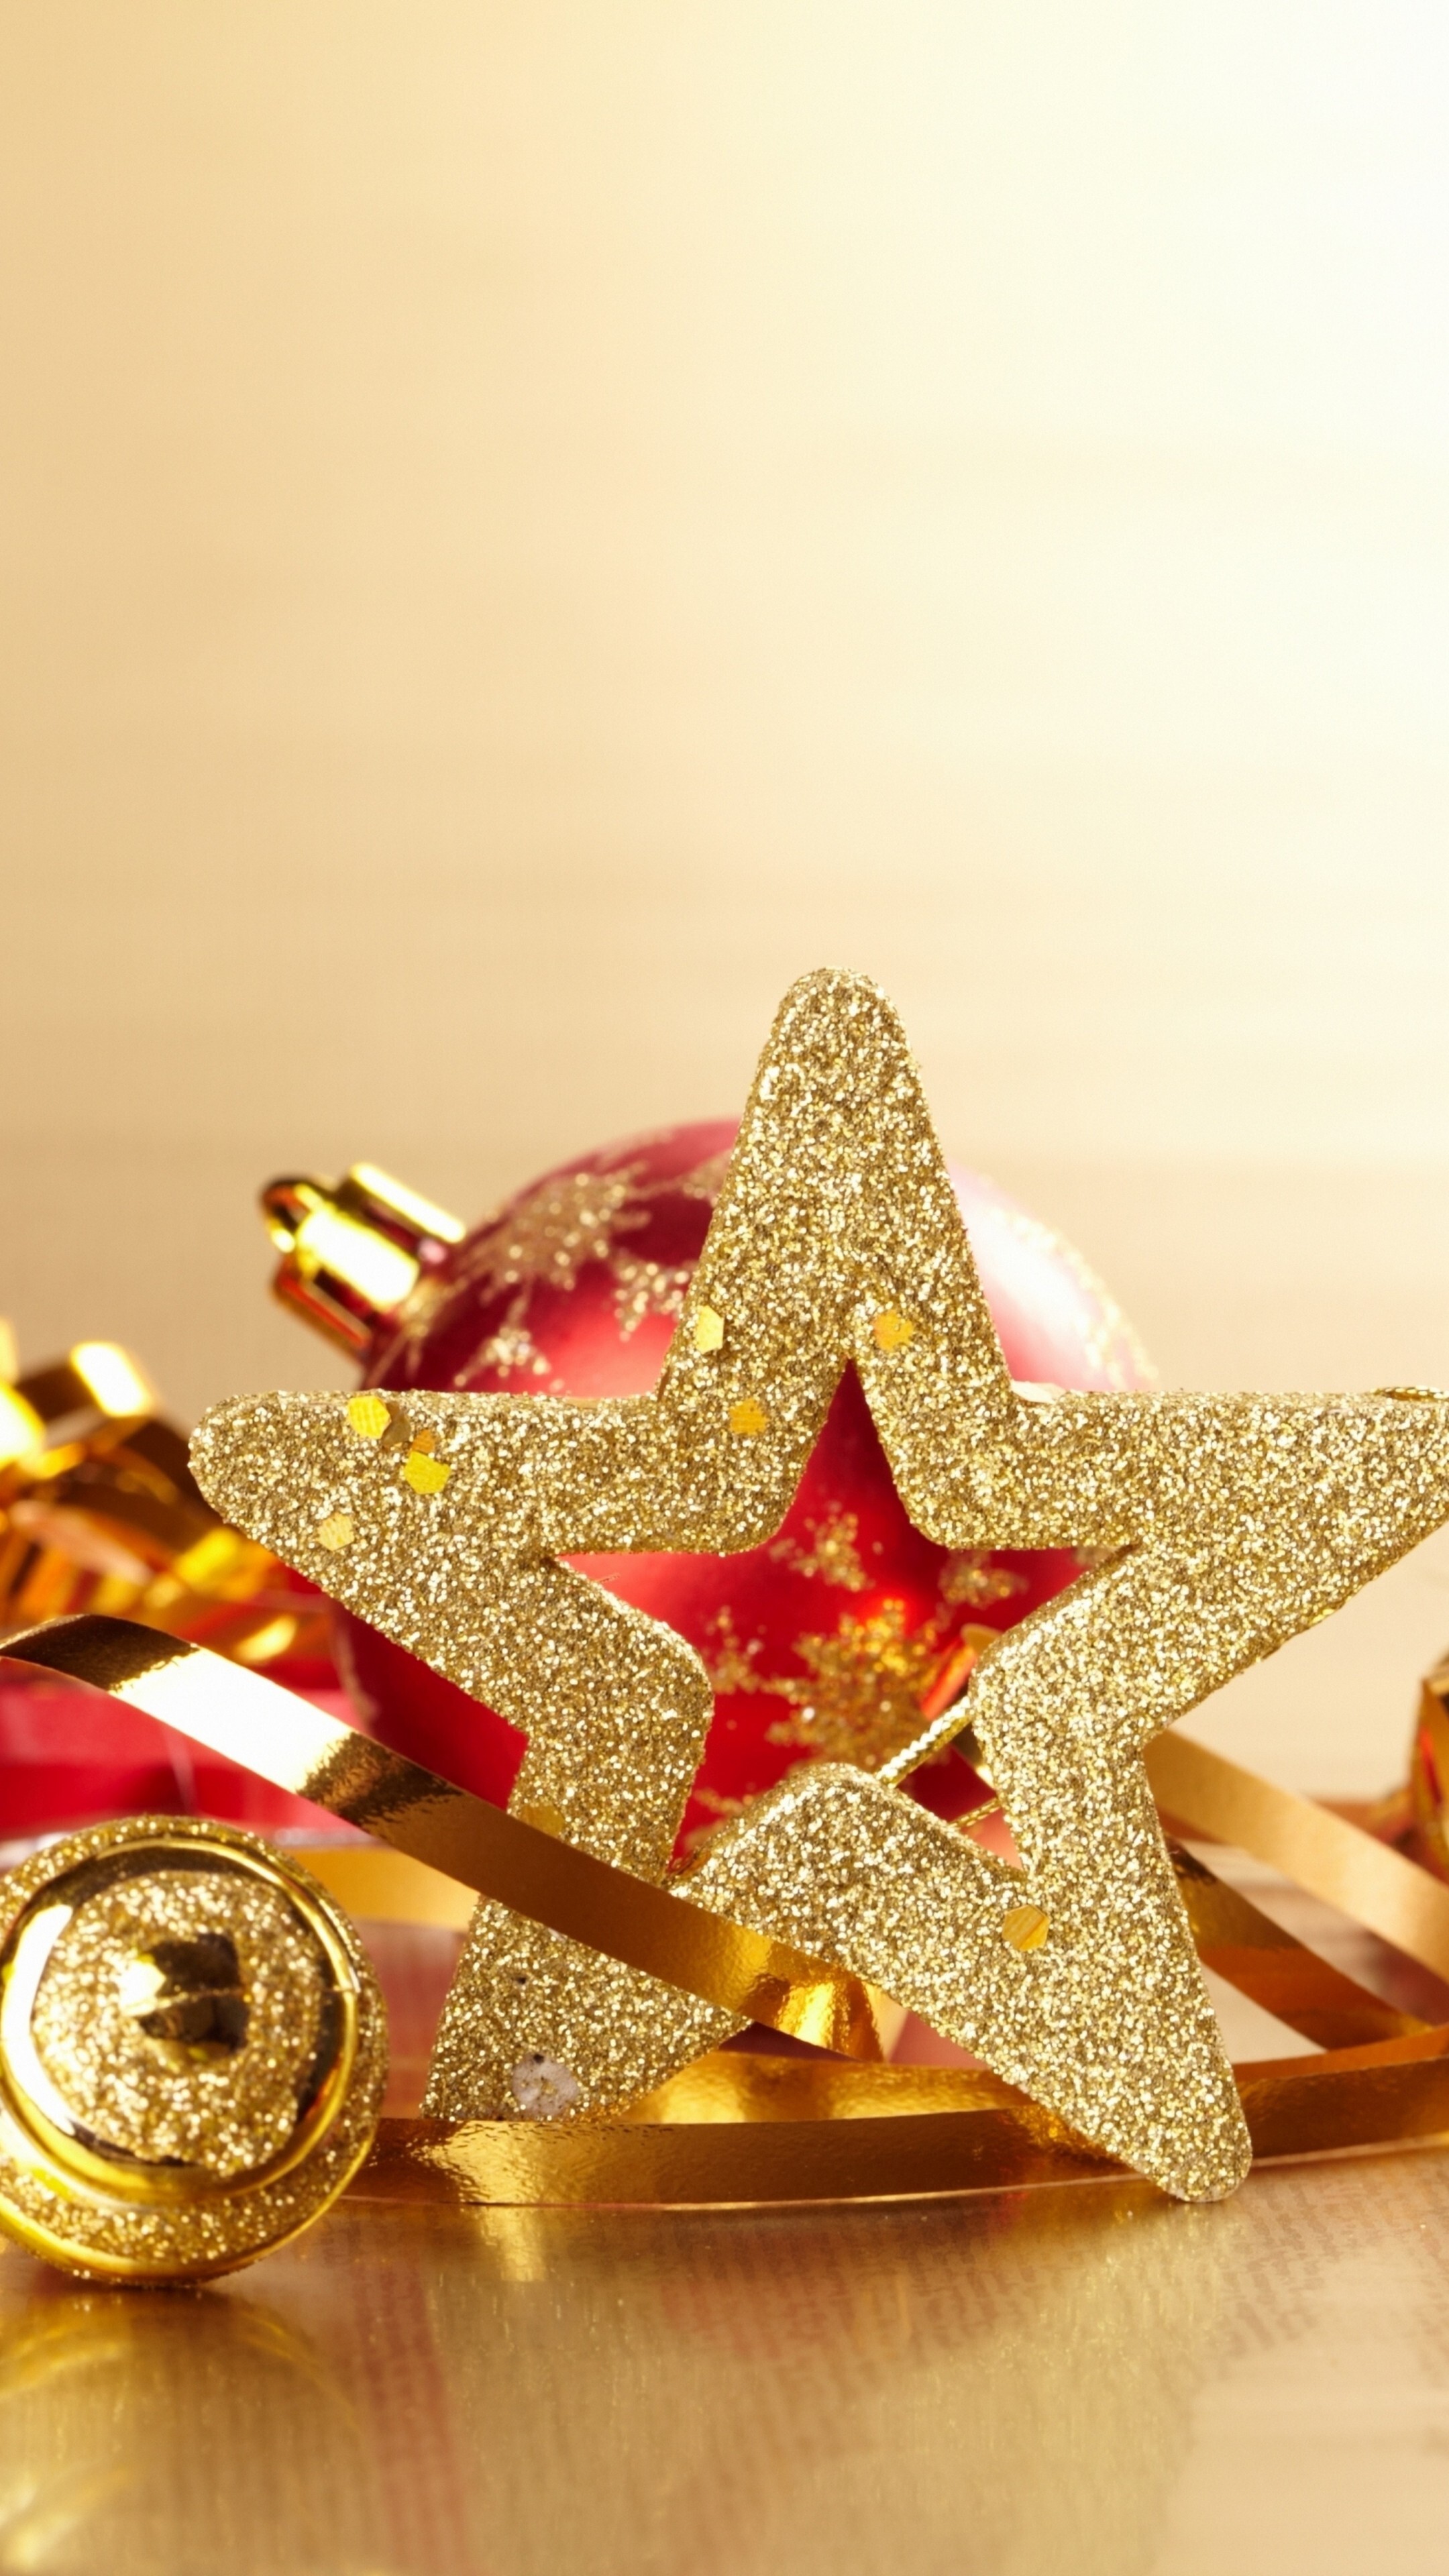 Gold Glitter: The decoration elements for a Christmas tree, Gilded Christmas ball and a star. 2160x3840 4K Wallpaper.